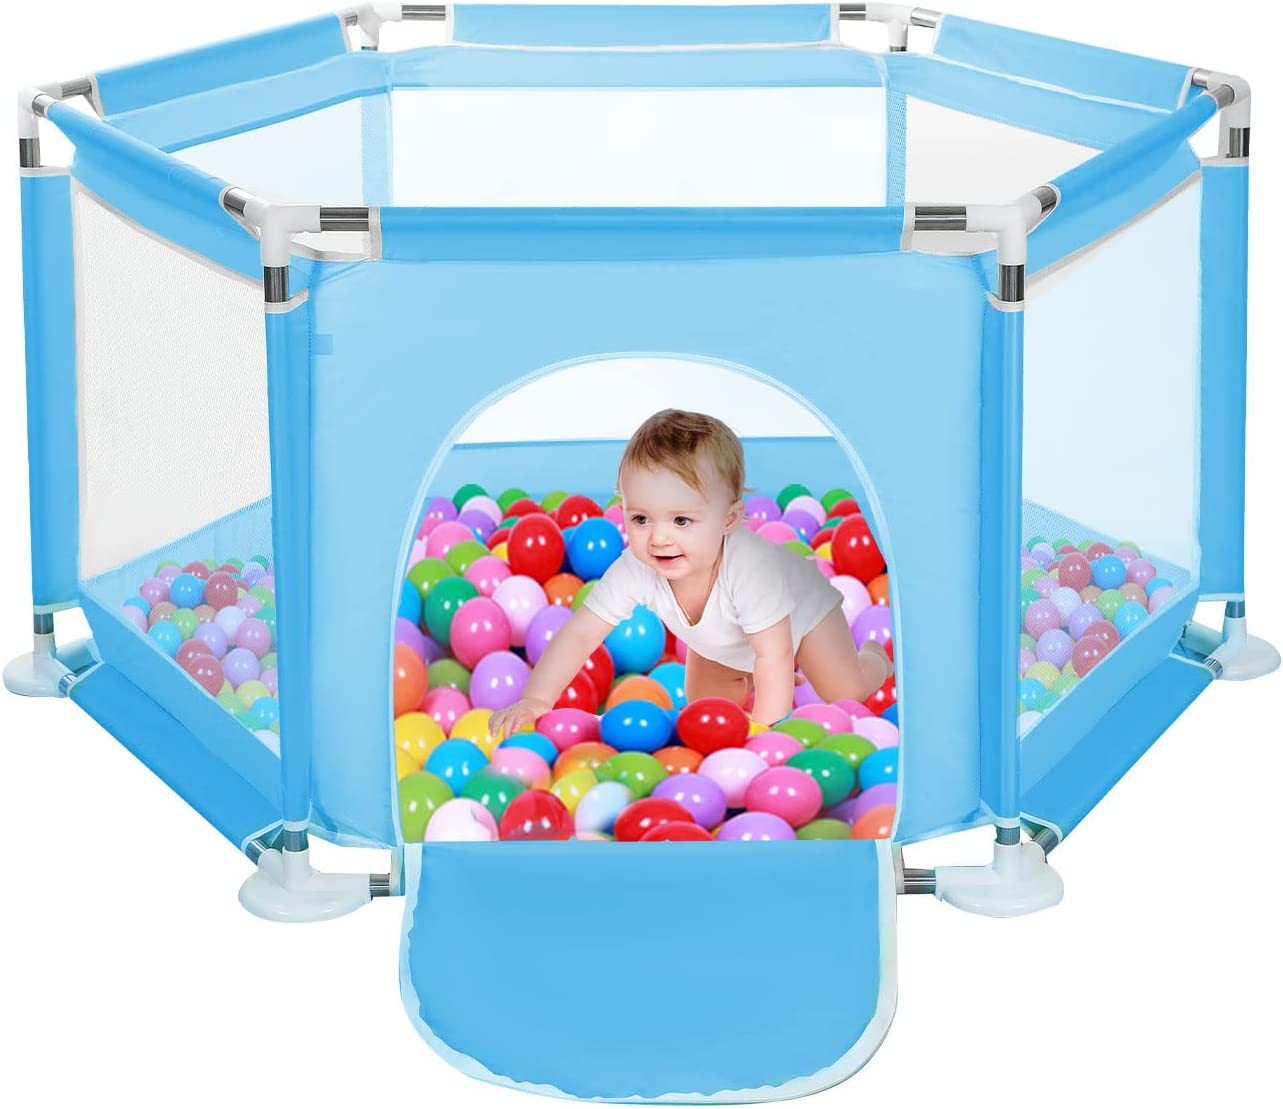 Durable Baby Fence Plastic without ocean ball - Buy Durable Baby Fence Plastic without ocean ball in Dubai - HOCC Dubai - Baby playground outdoor - Shop baby product - Shop Pet product - shop home decor and lighting in Dubai - HOCC Dubai - Baby playgrou